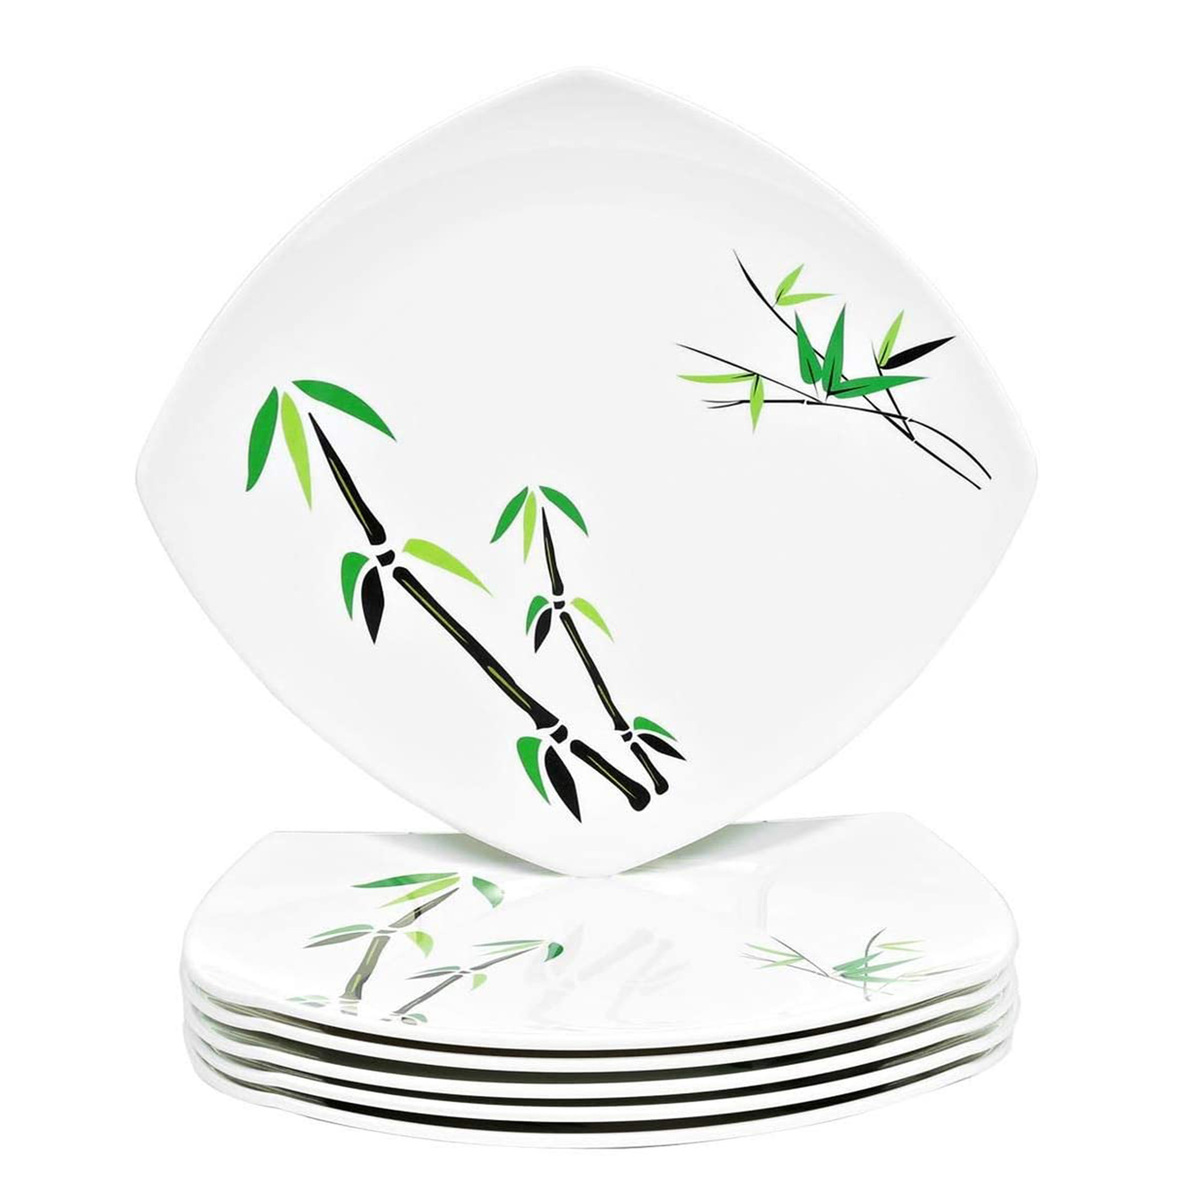 Hoover Bamboo Tree Print Square Plate, 17 cm, Green/White, HVR.GB806